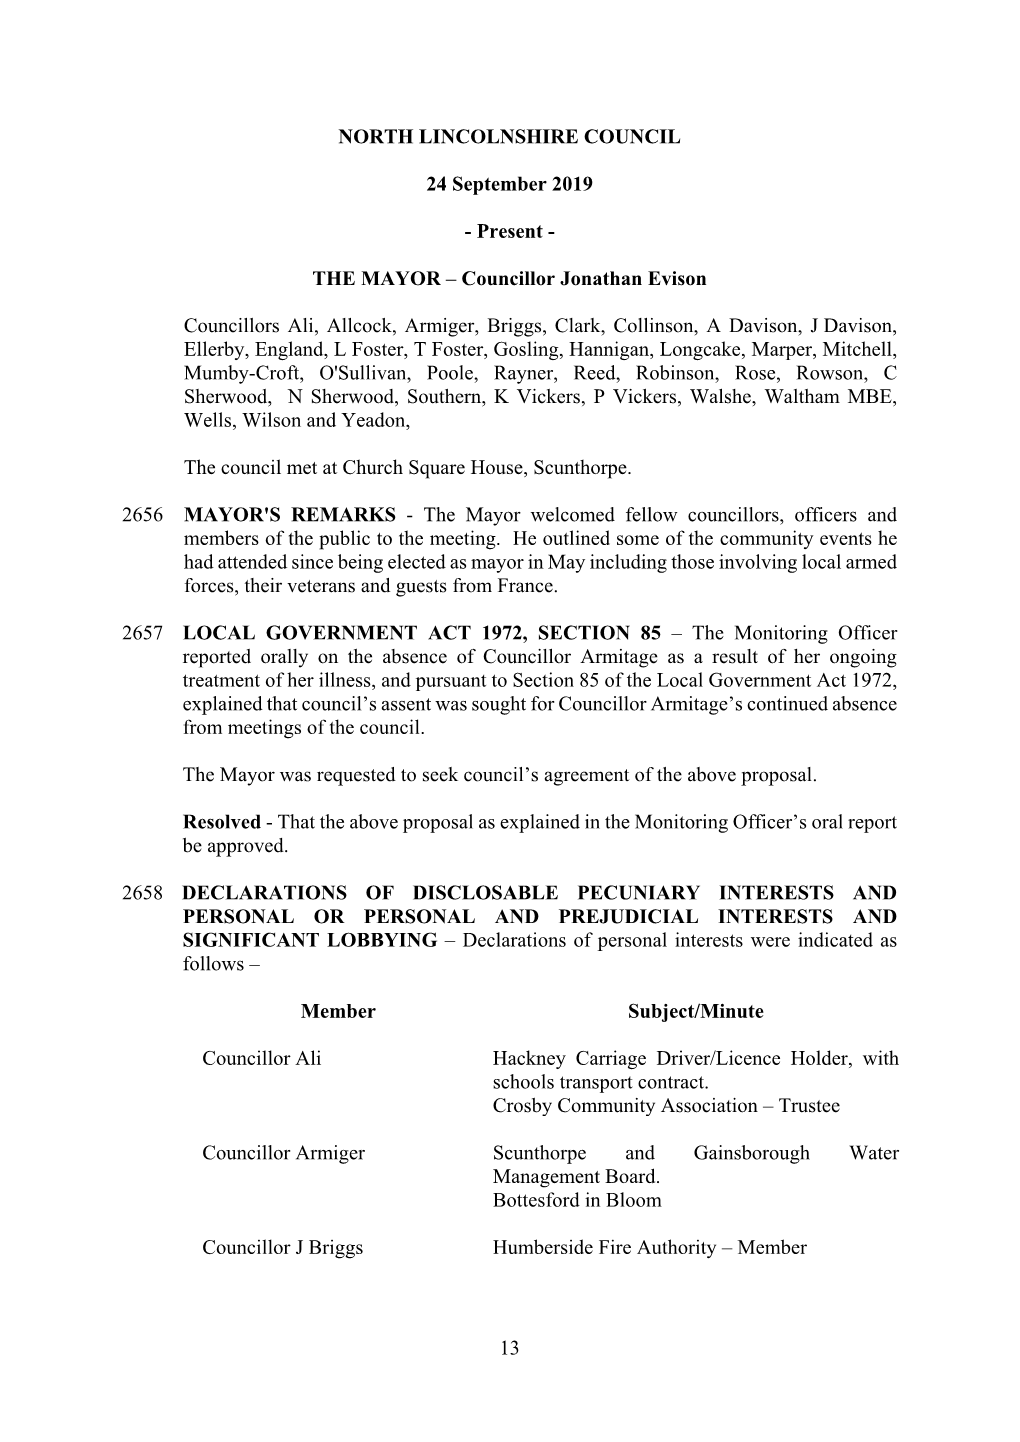 13 NORTH LINCOLNSHIRE COUNCIL 24 September 2019